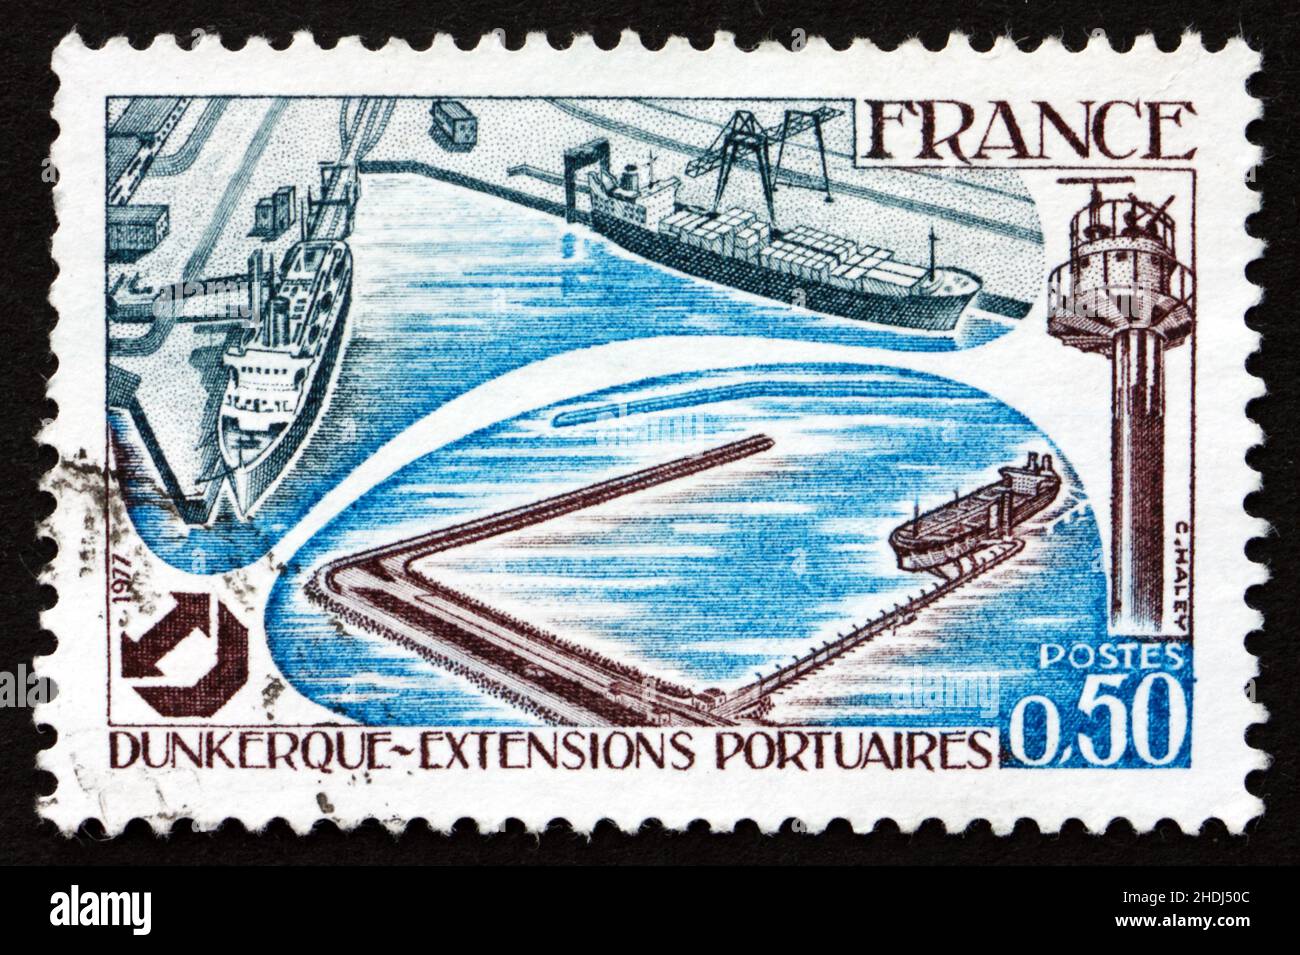 FRANCE - CIRCA 1977: a stamp printed in the France shows Dunkirk Harbor, Expansion of Dunkirk Harbor Facilities, circa 1977 Stock Photo